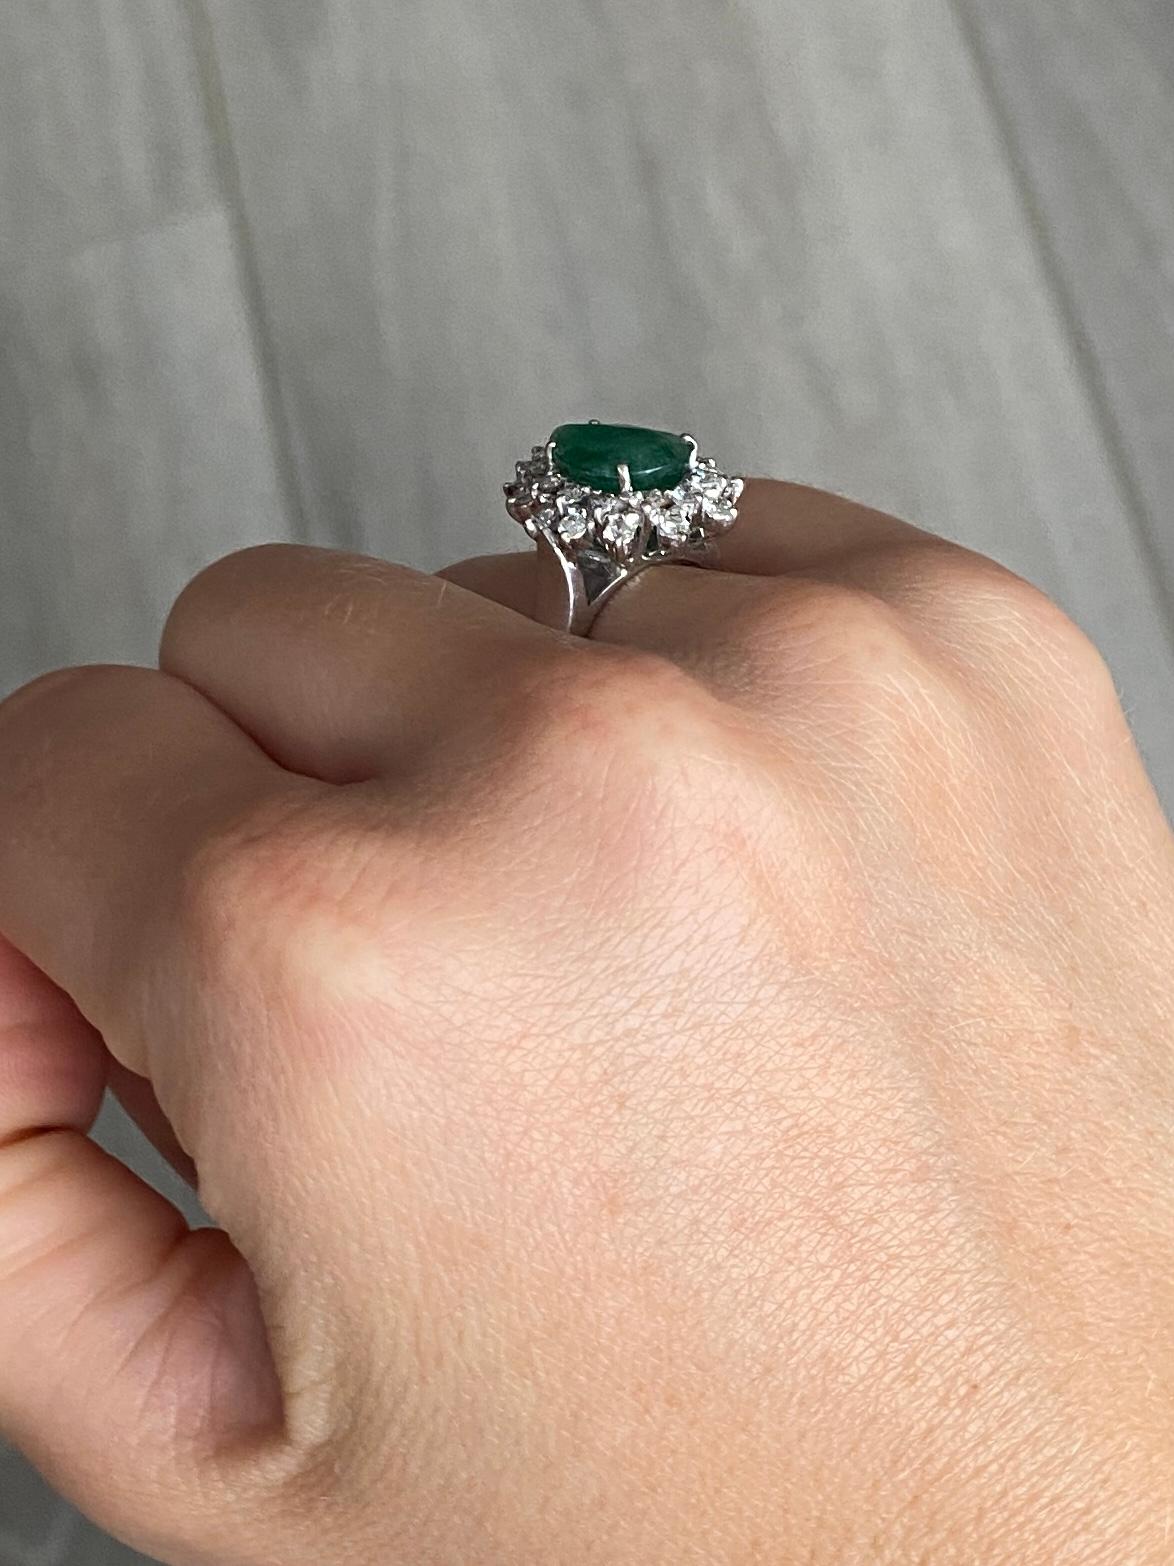 This stunning pear shaped ring holds an emerald at the centre measuring approx 2.5ct. The diamonds surrounding this gorgeous green stone are very sparkly and total 1carat. Modelled in 18ct white gold. 

Ring Size: N 1/2 or 7  
Top to Bottom: